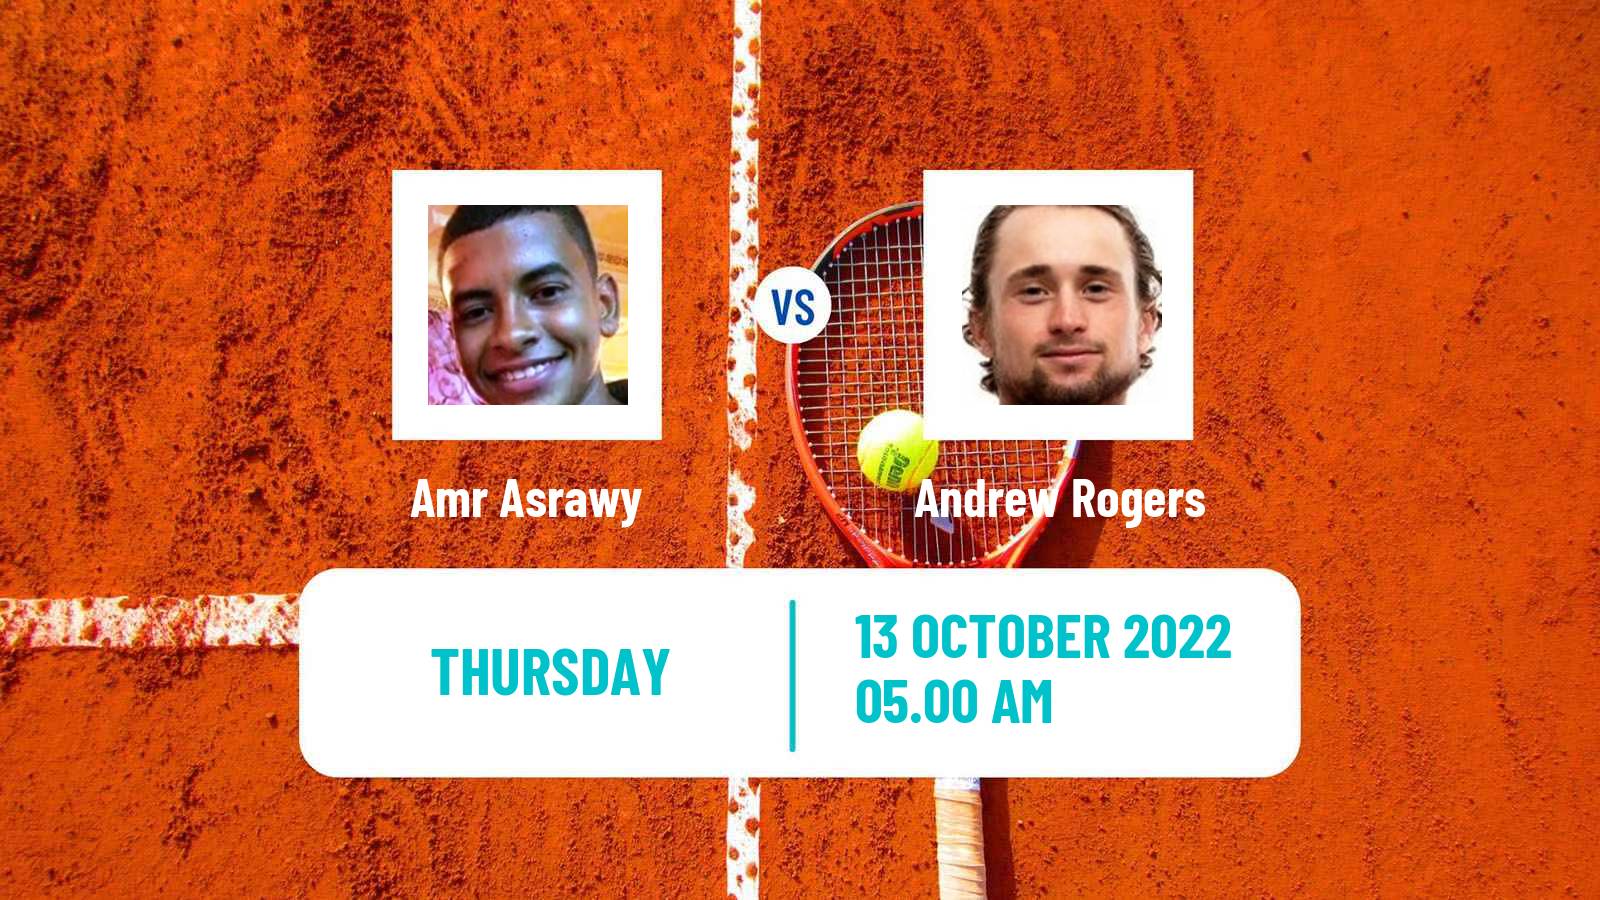 Tennis ITF Tournaments Amr Asrawy - Andrew Rogers